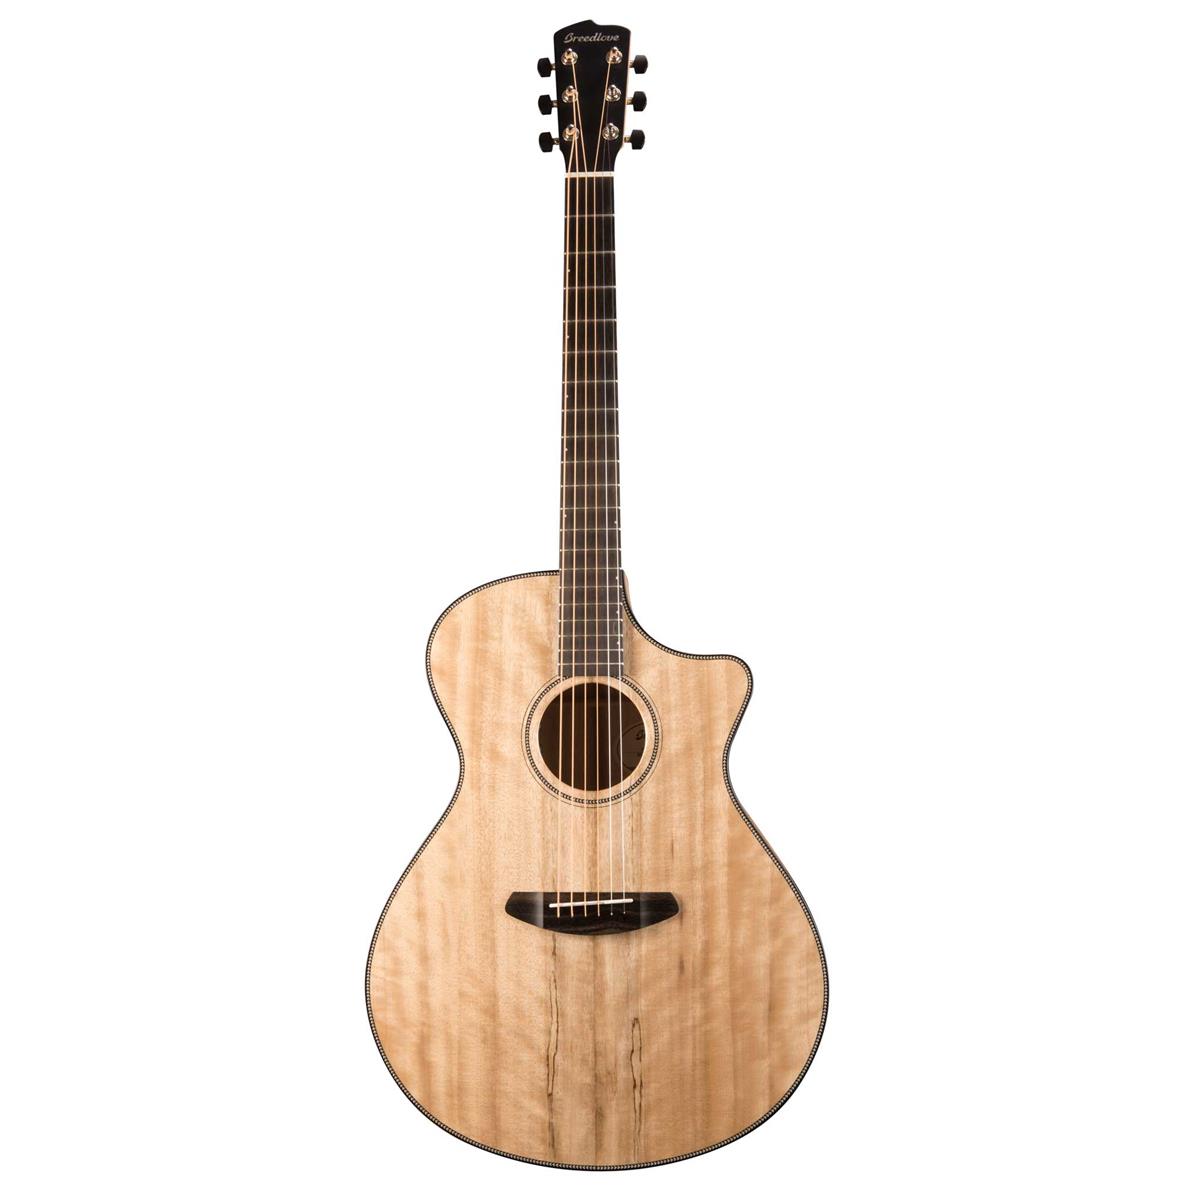 Breedlove Oregon Concerto CE Acoustic Electric Guitar, Myrtlewood -  ORCO01CEMYMY